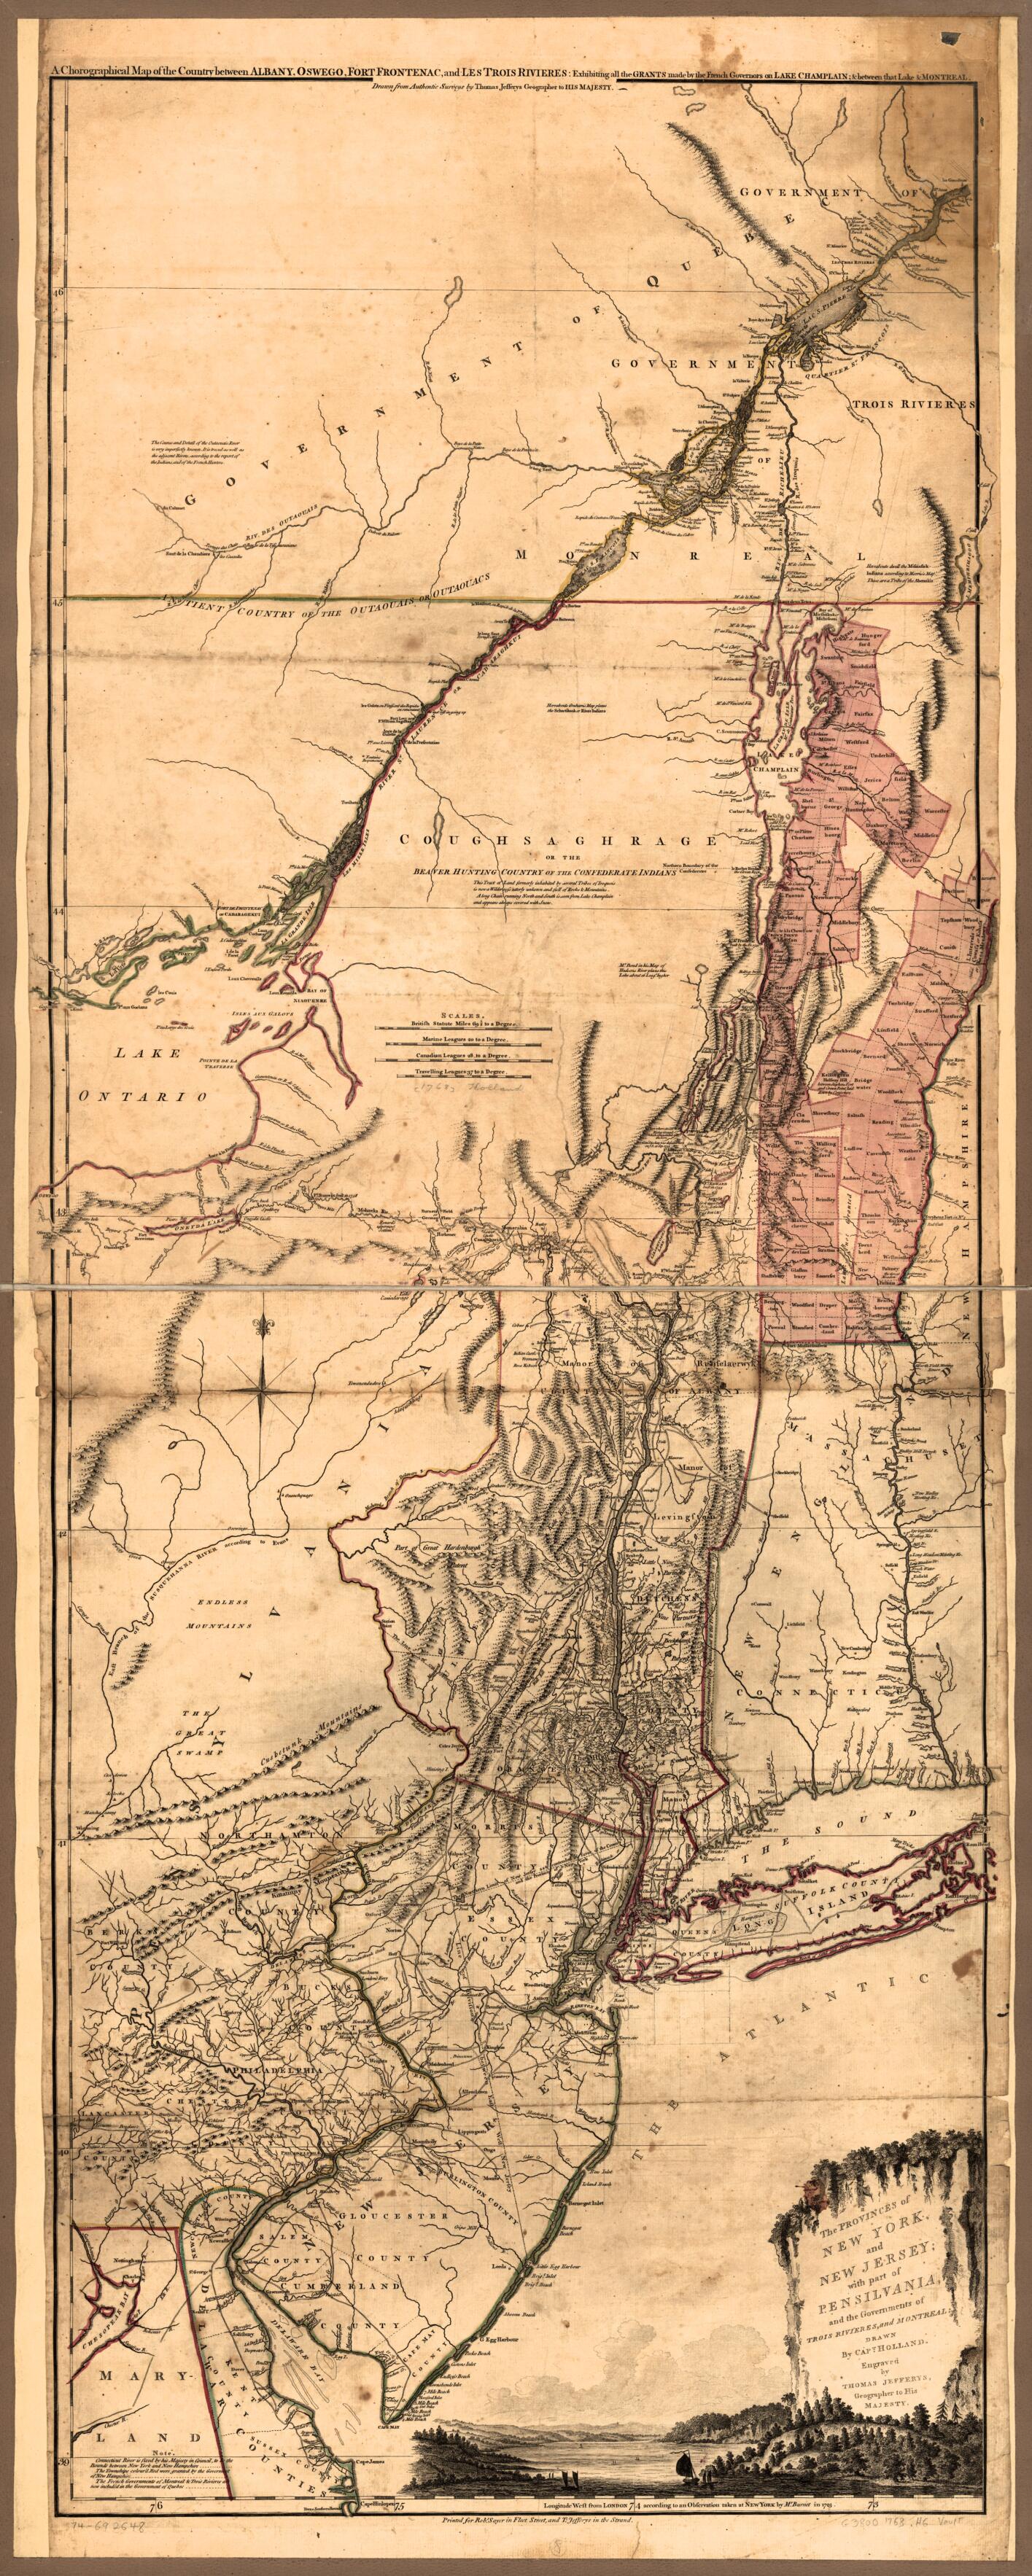 This old map of The Provinces of New York, and New Jersey; With Part of Pensilvania, and the Governments of Trois Rivières, and Montreal: from 1768 was created by Samuel Holland, Thomas Jefferys, Robert Sayer in 1768